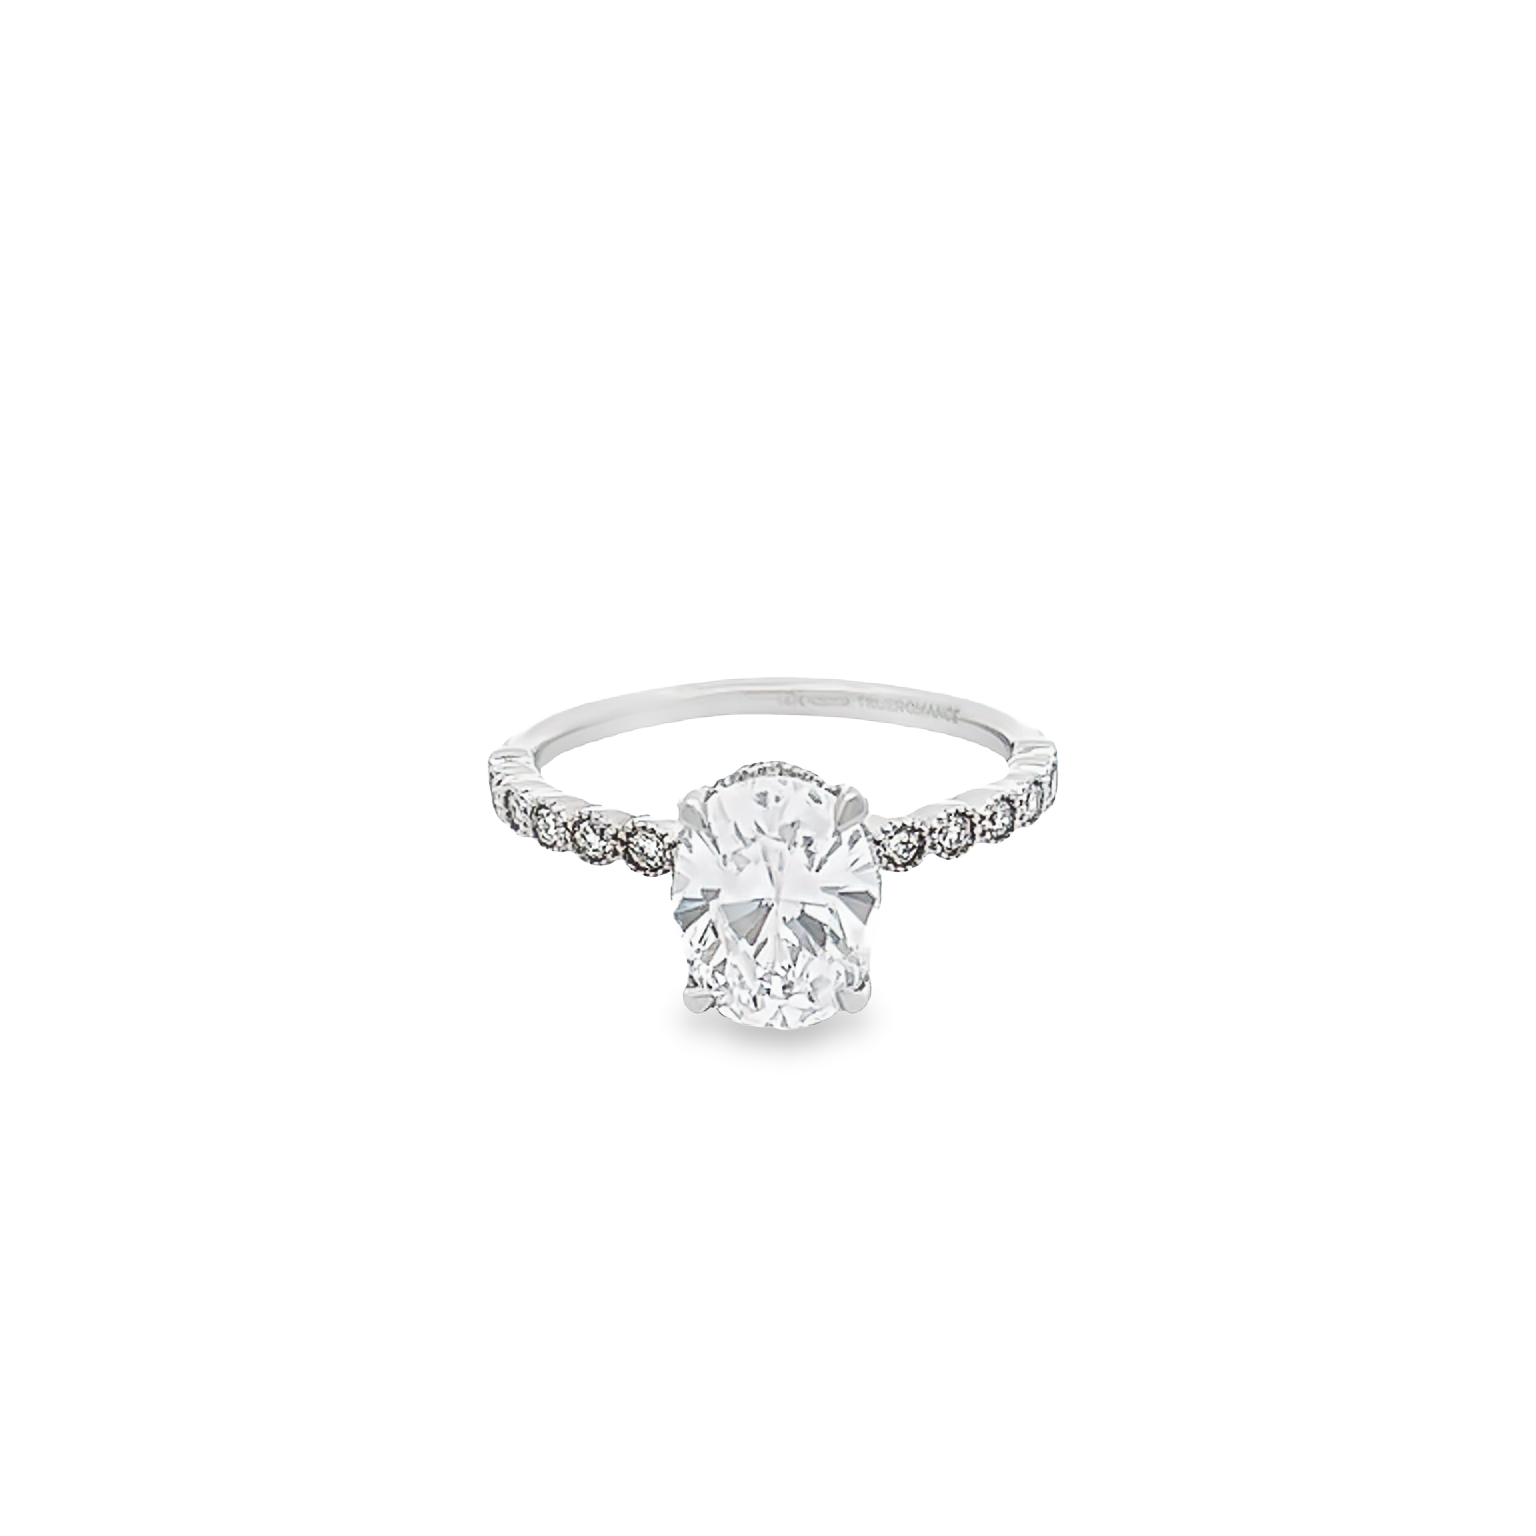 14 Karat white gold semi mount engagement ring with 28=0.28 total weight Round Brilliant G VS Diamonds. Size 7